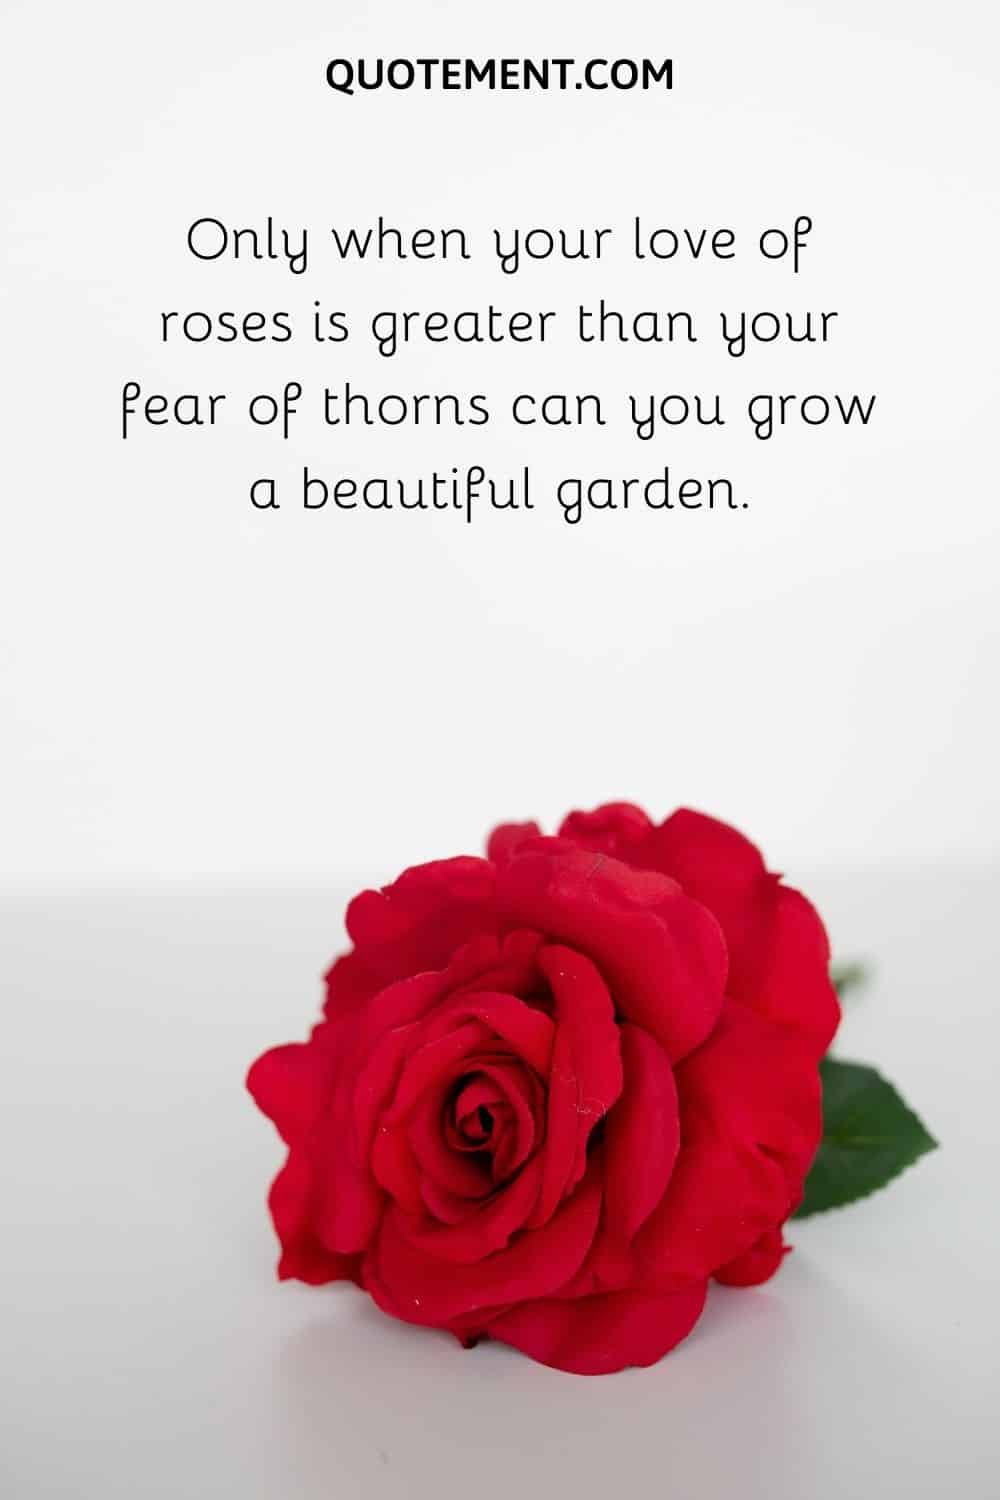 Only when your love of roses is greater than your fear of thorns can you grow a beautiful garden.